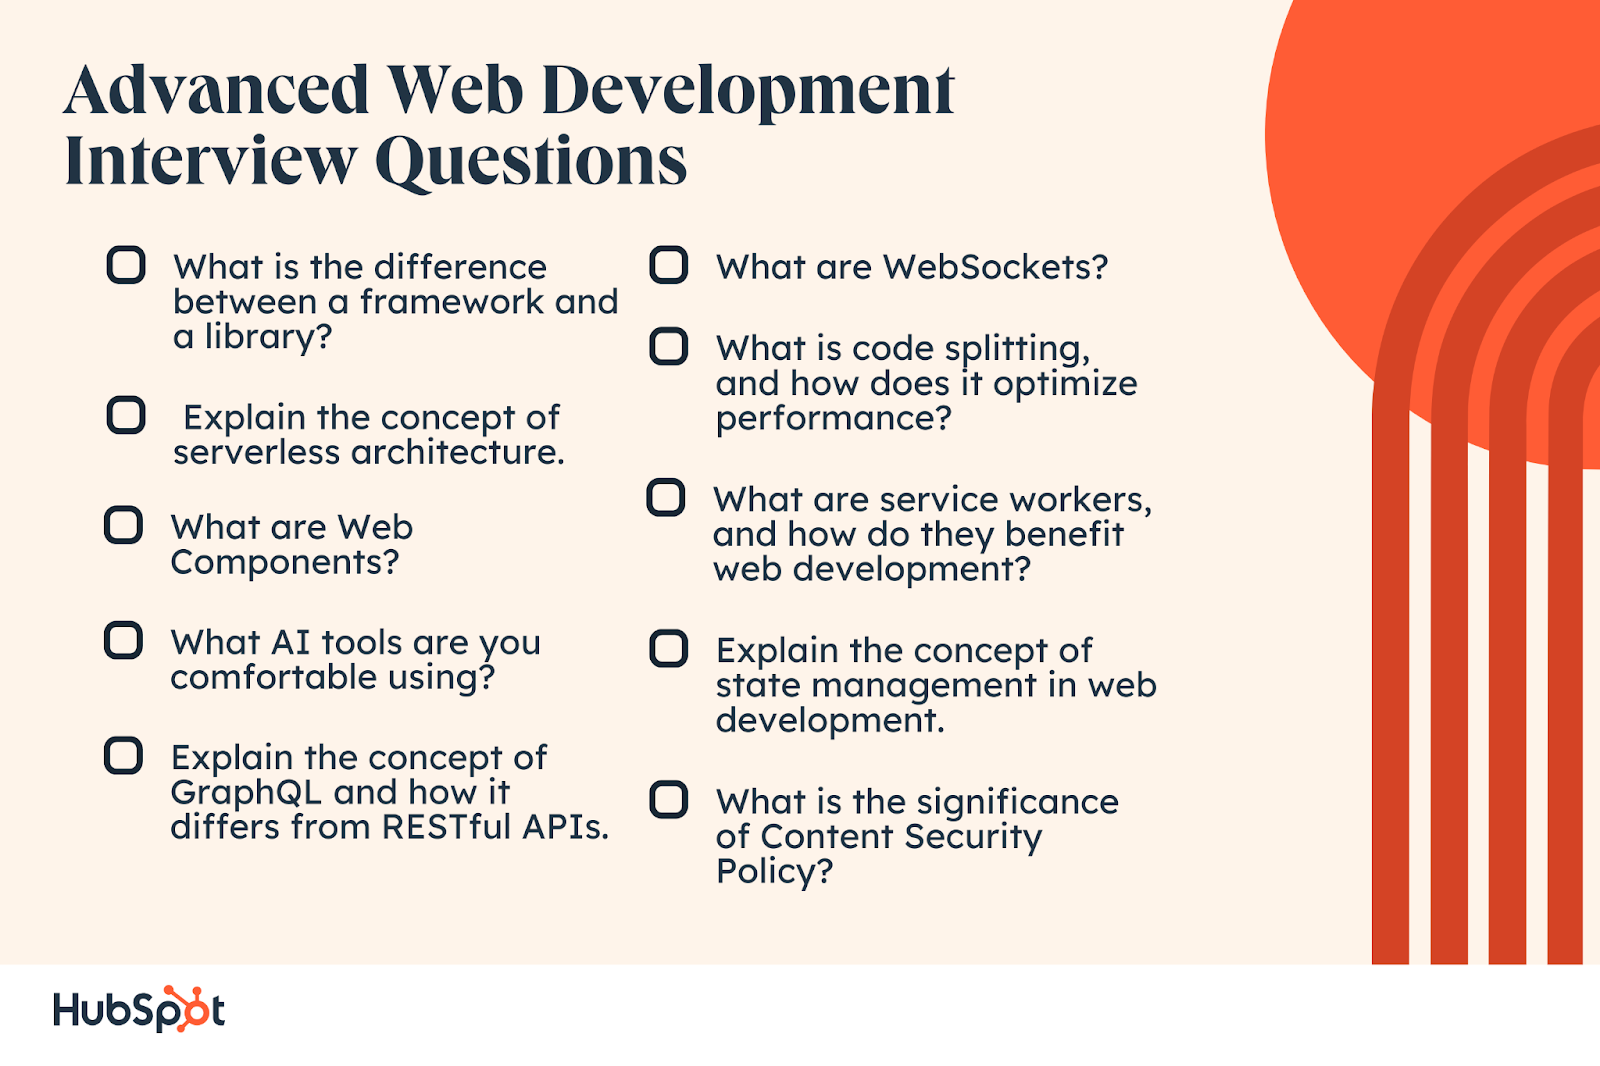 Advanced Web Development Interview Questions. What is the difference between a framework and a library? What are Web Components? What AI tools are you comfortable using? Explain the concept of serverless architecture. Explain the concept of GraphQL and how it differs from RESTful APIs. What are WebSockets? What is code splitting, and how does it optimize performance? Explain the concept of state management in web development. What is the significance of Content Security Policy? What are service workers, and how do they benefit web development?